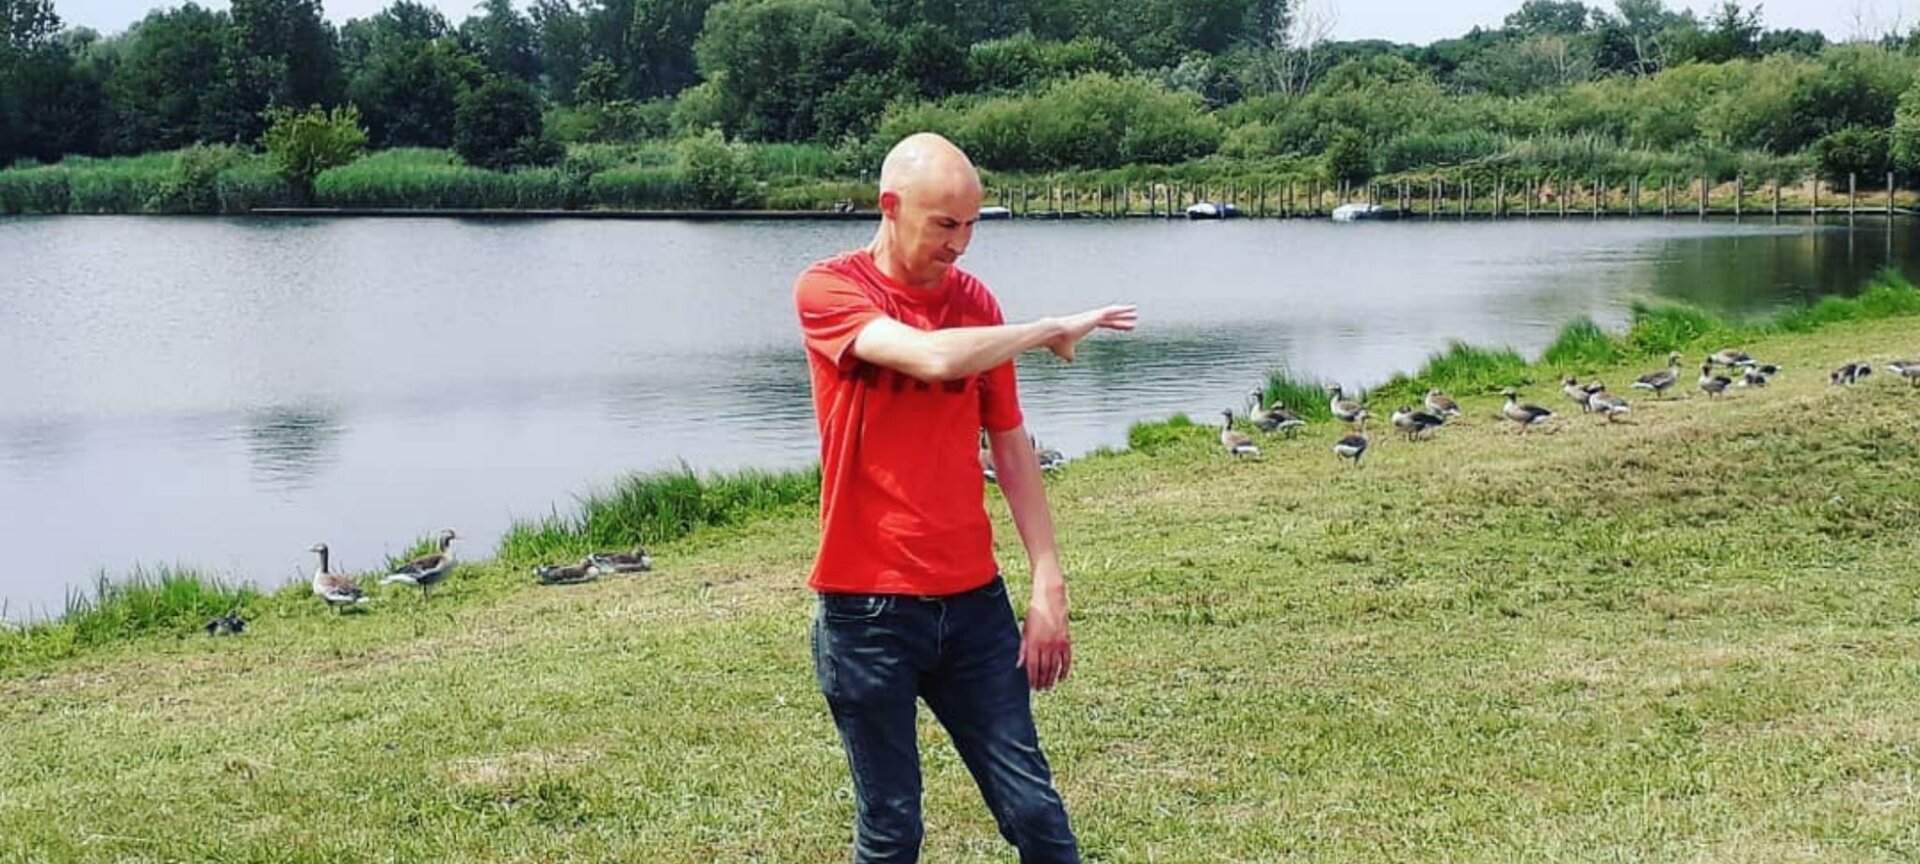 Tai Chi & Relaxation - Schulensmeer - tai chi in nature